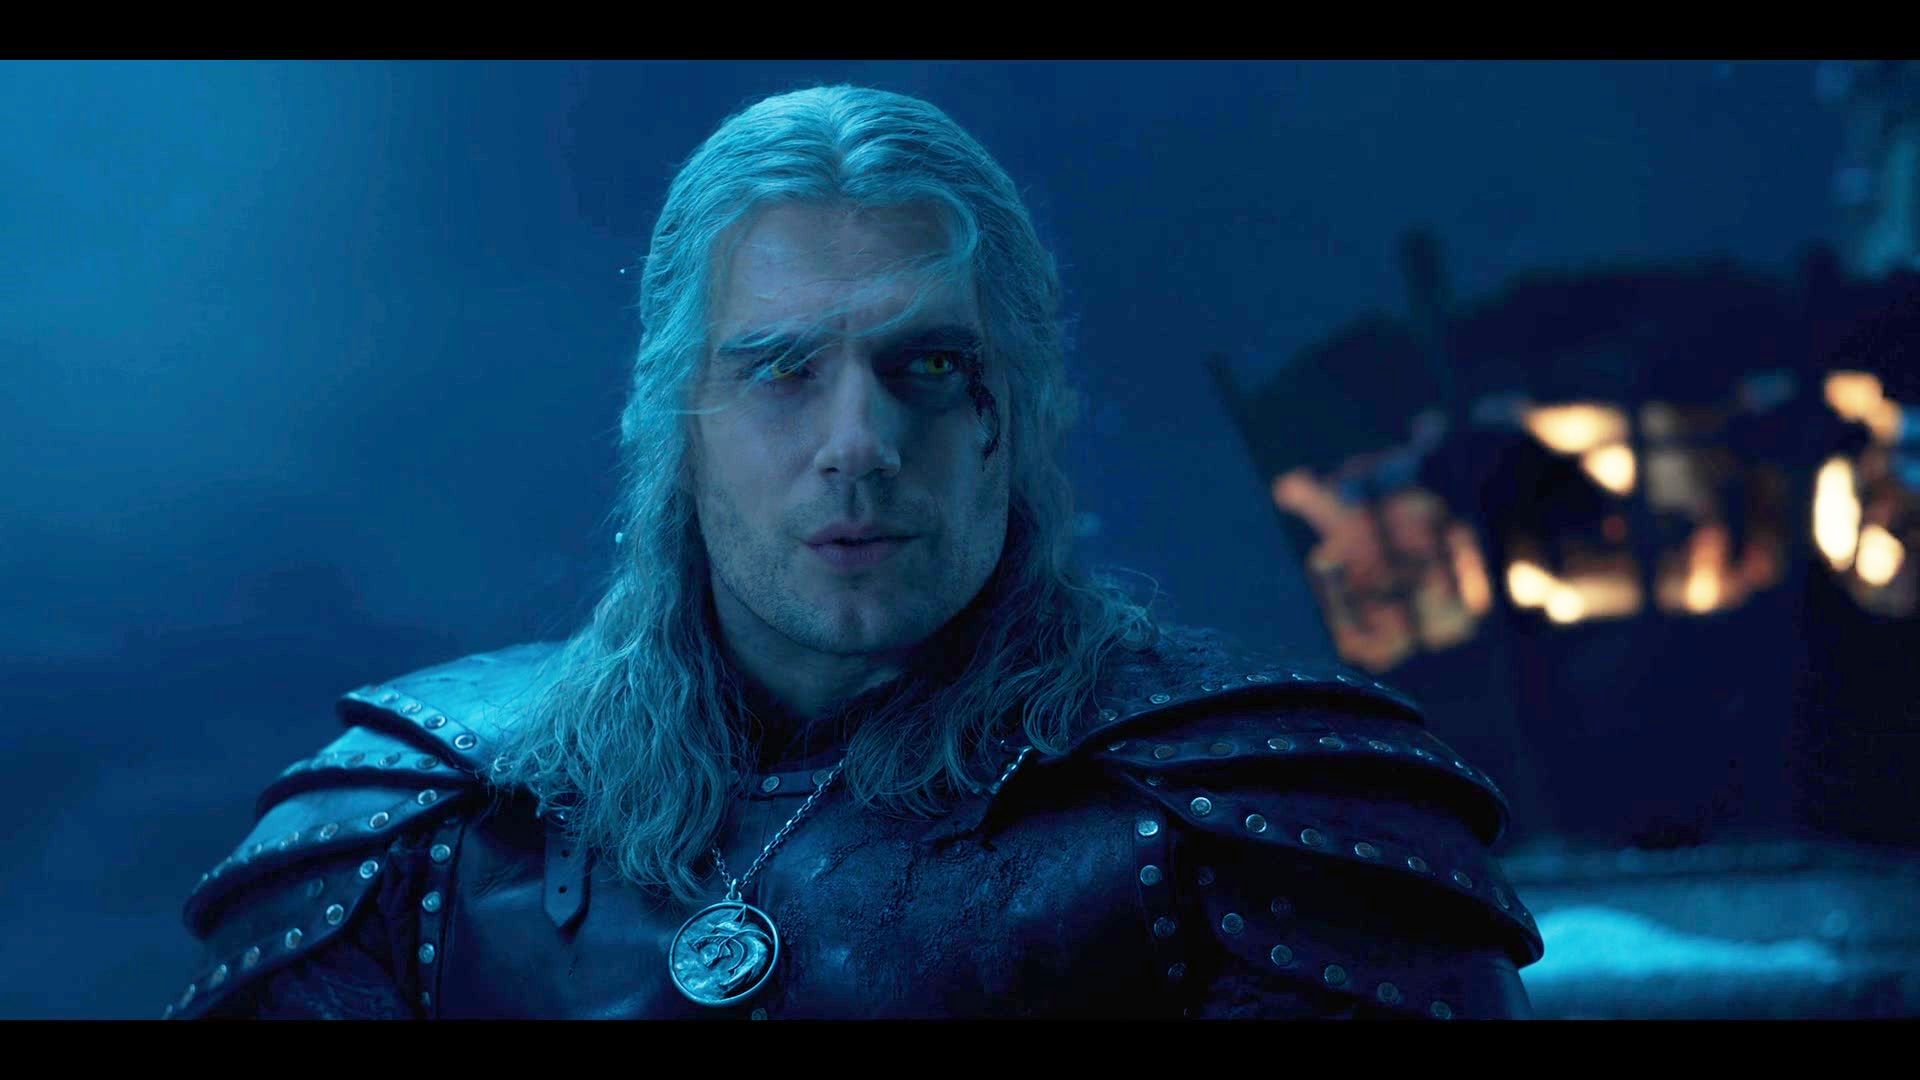 Geralt (Henry Cavill) contemplates his next steps in The Witcher Season 2 Episode 8 “Family” (2021) via Netflix